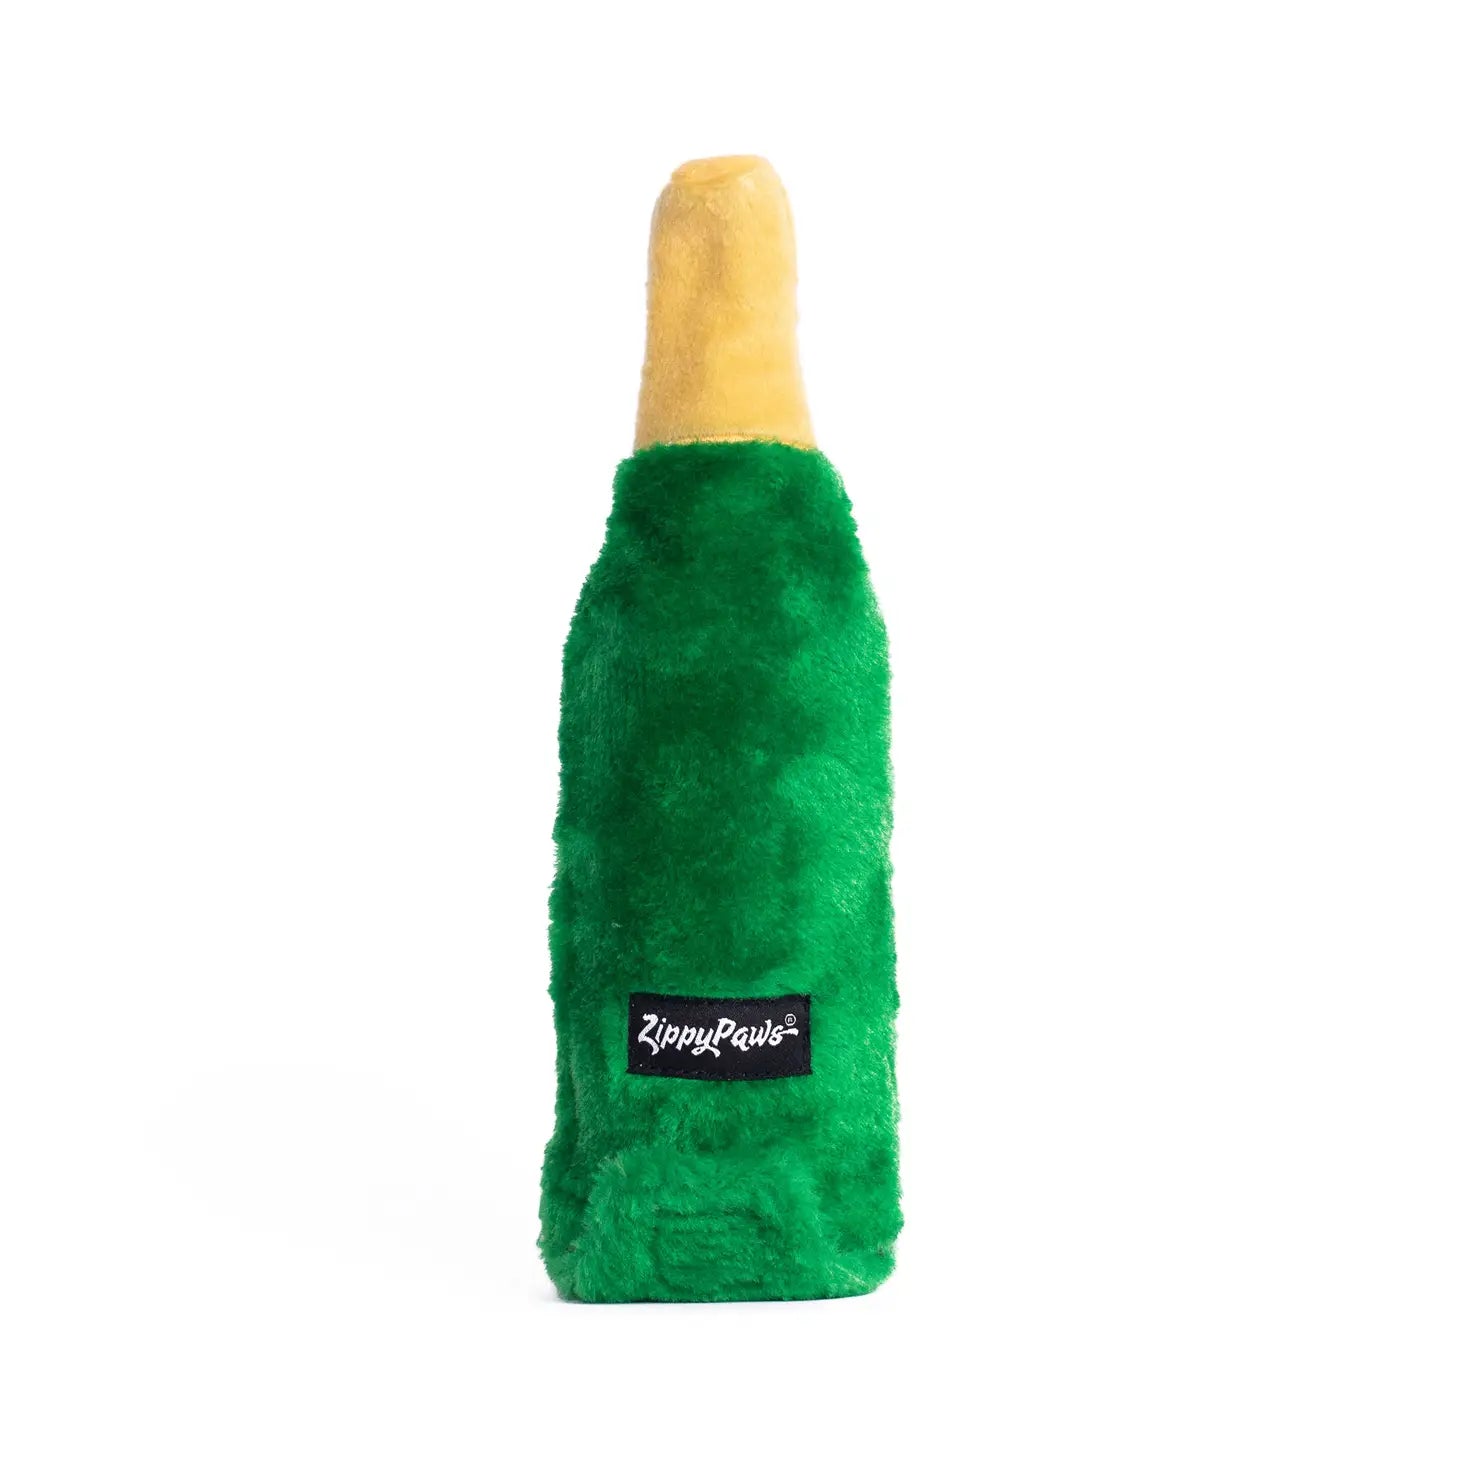 Back view of a plushy green champagne bottle dog toy.